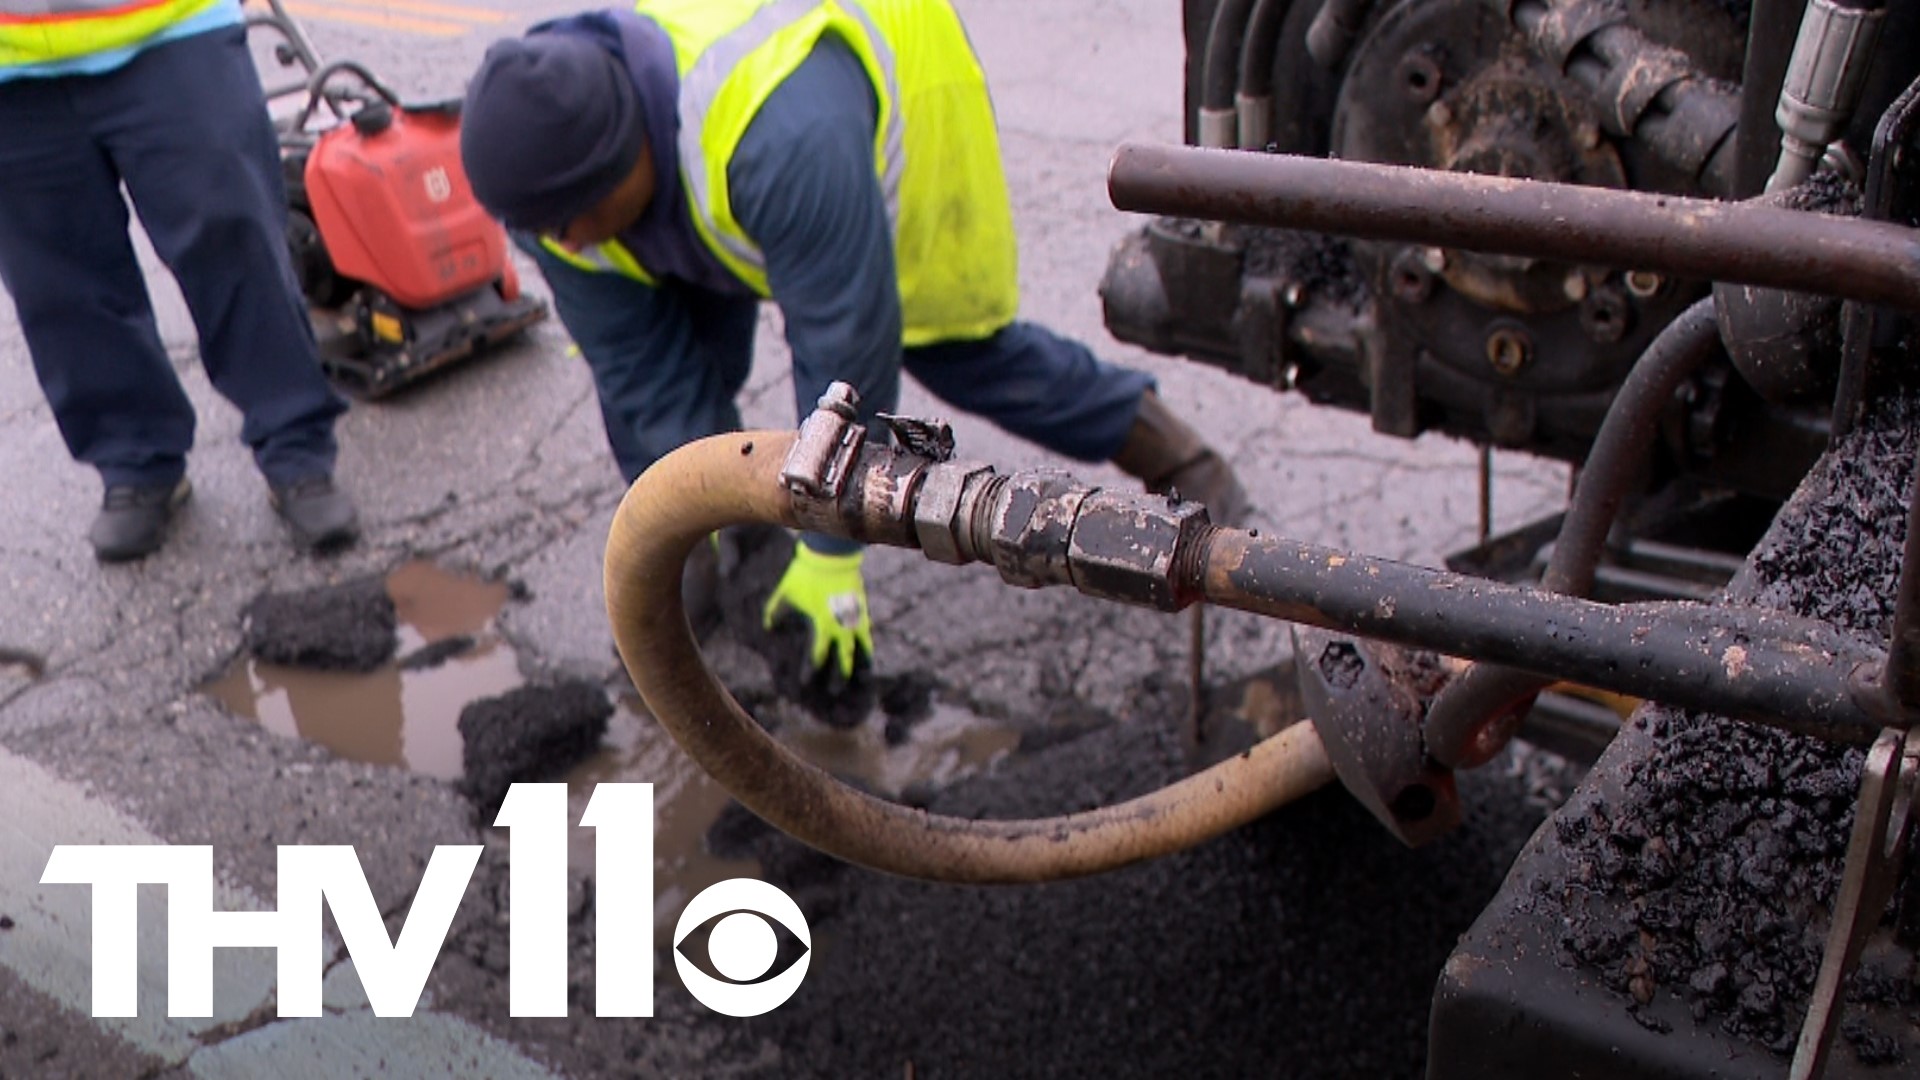 Street crews are working to get roads in better shape after the winter weather tore up Arkansas roads and created potholes, making a bumpy commute for many.